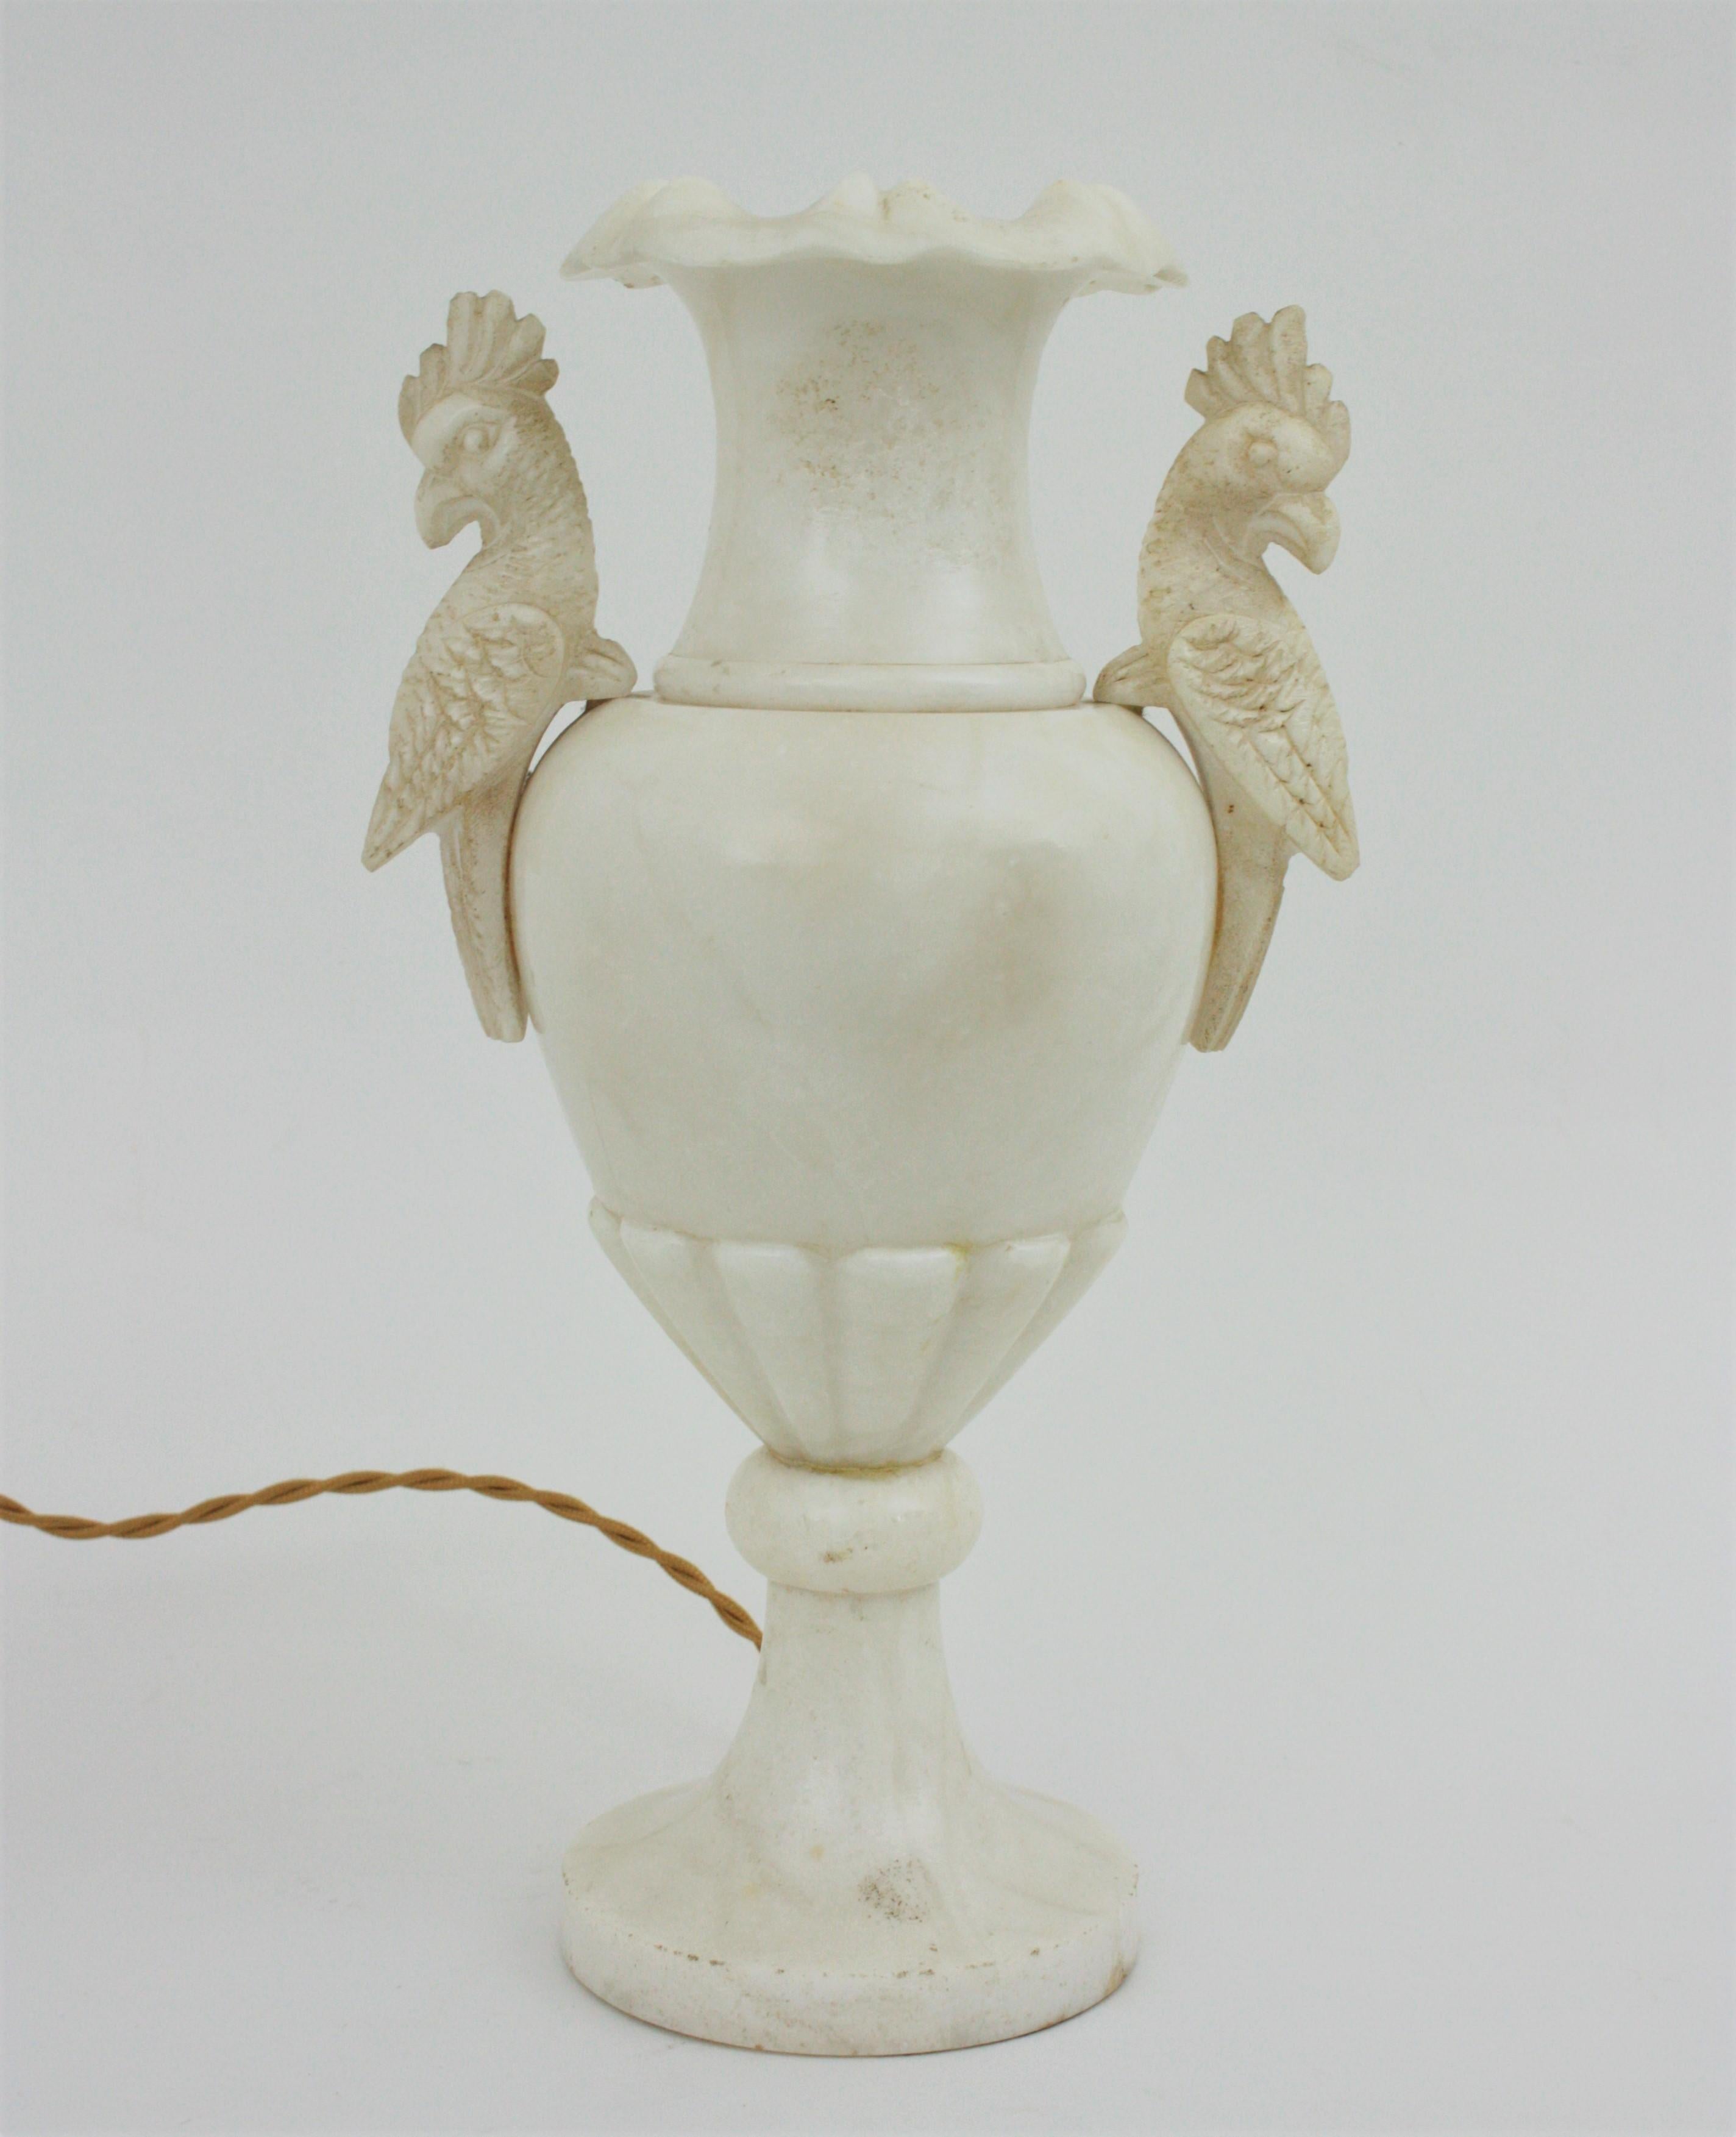 Twin-handled urn table lamp with carved parrot details. Spain, 1930s
This eye-catching alabaster urn lamp has an elegant neoclassical design. The carving parrots handles mark the difference in this piece. Manufactured at the art deco period.
Place